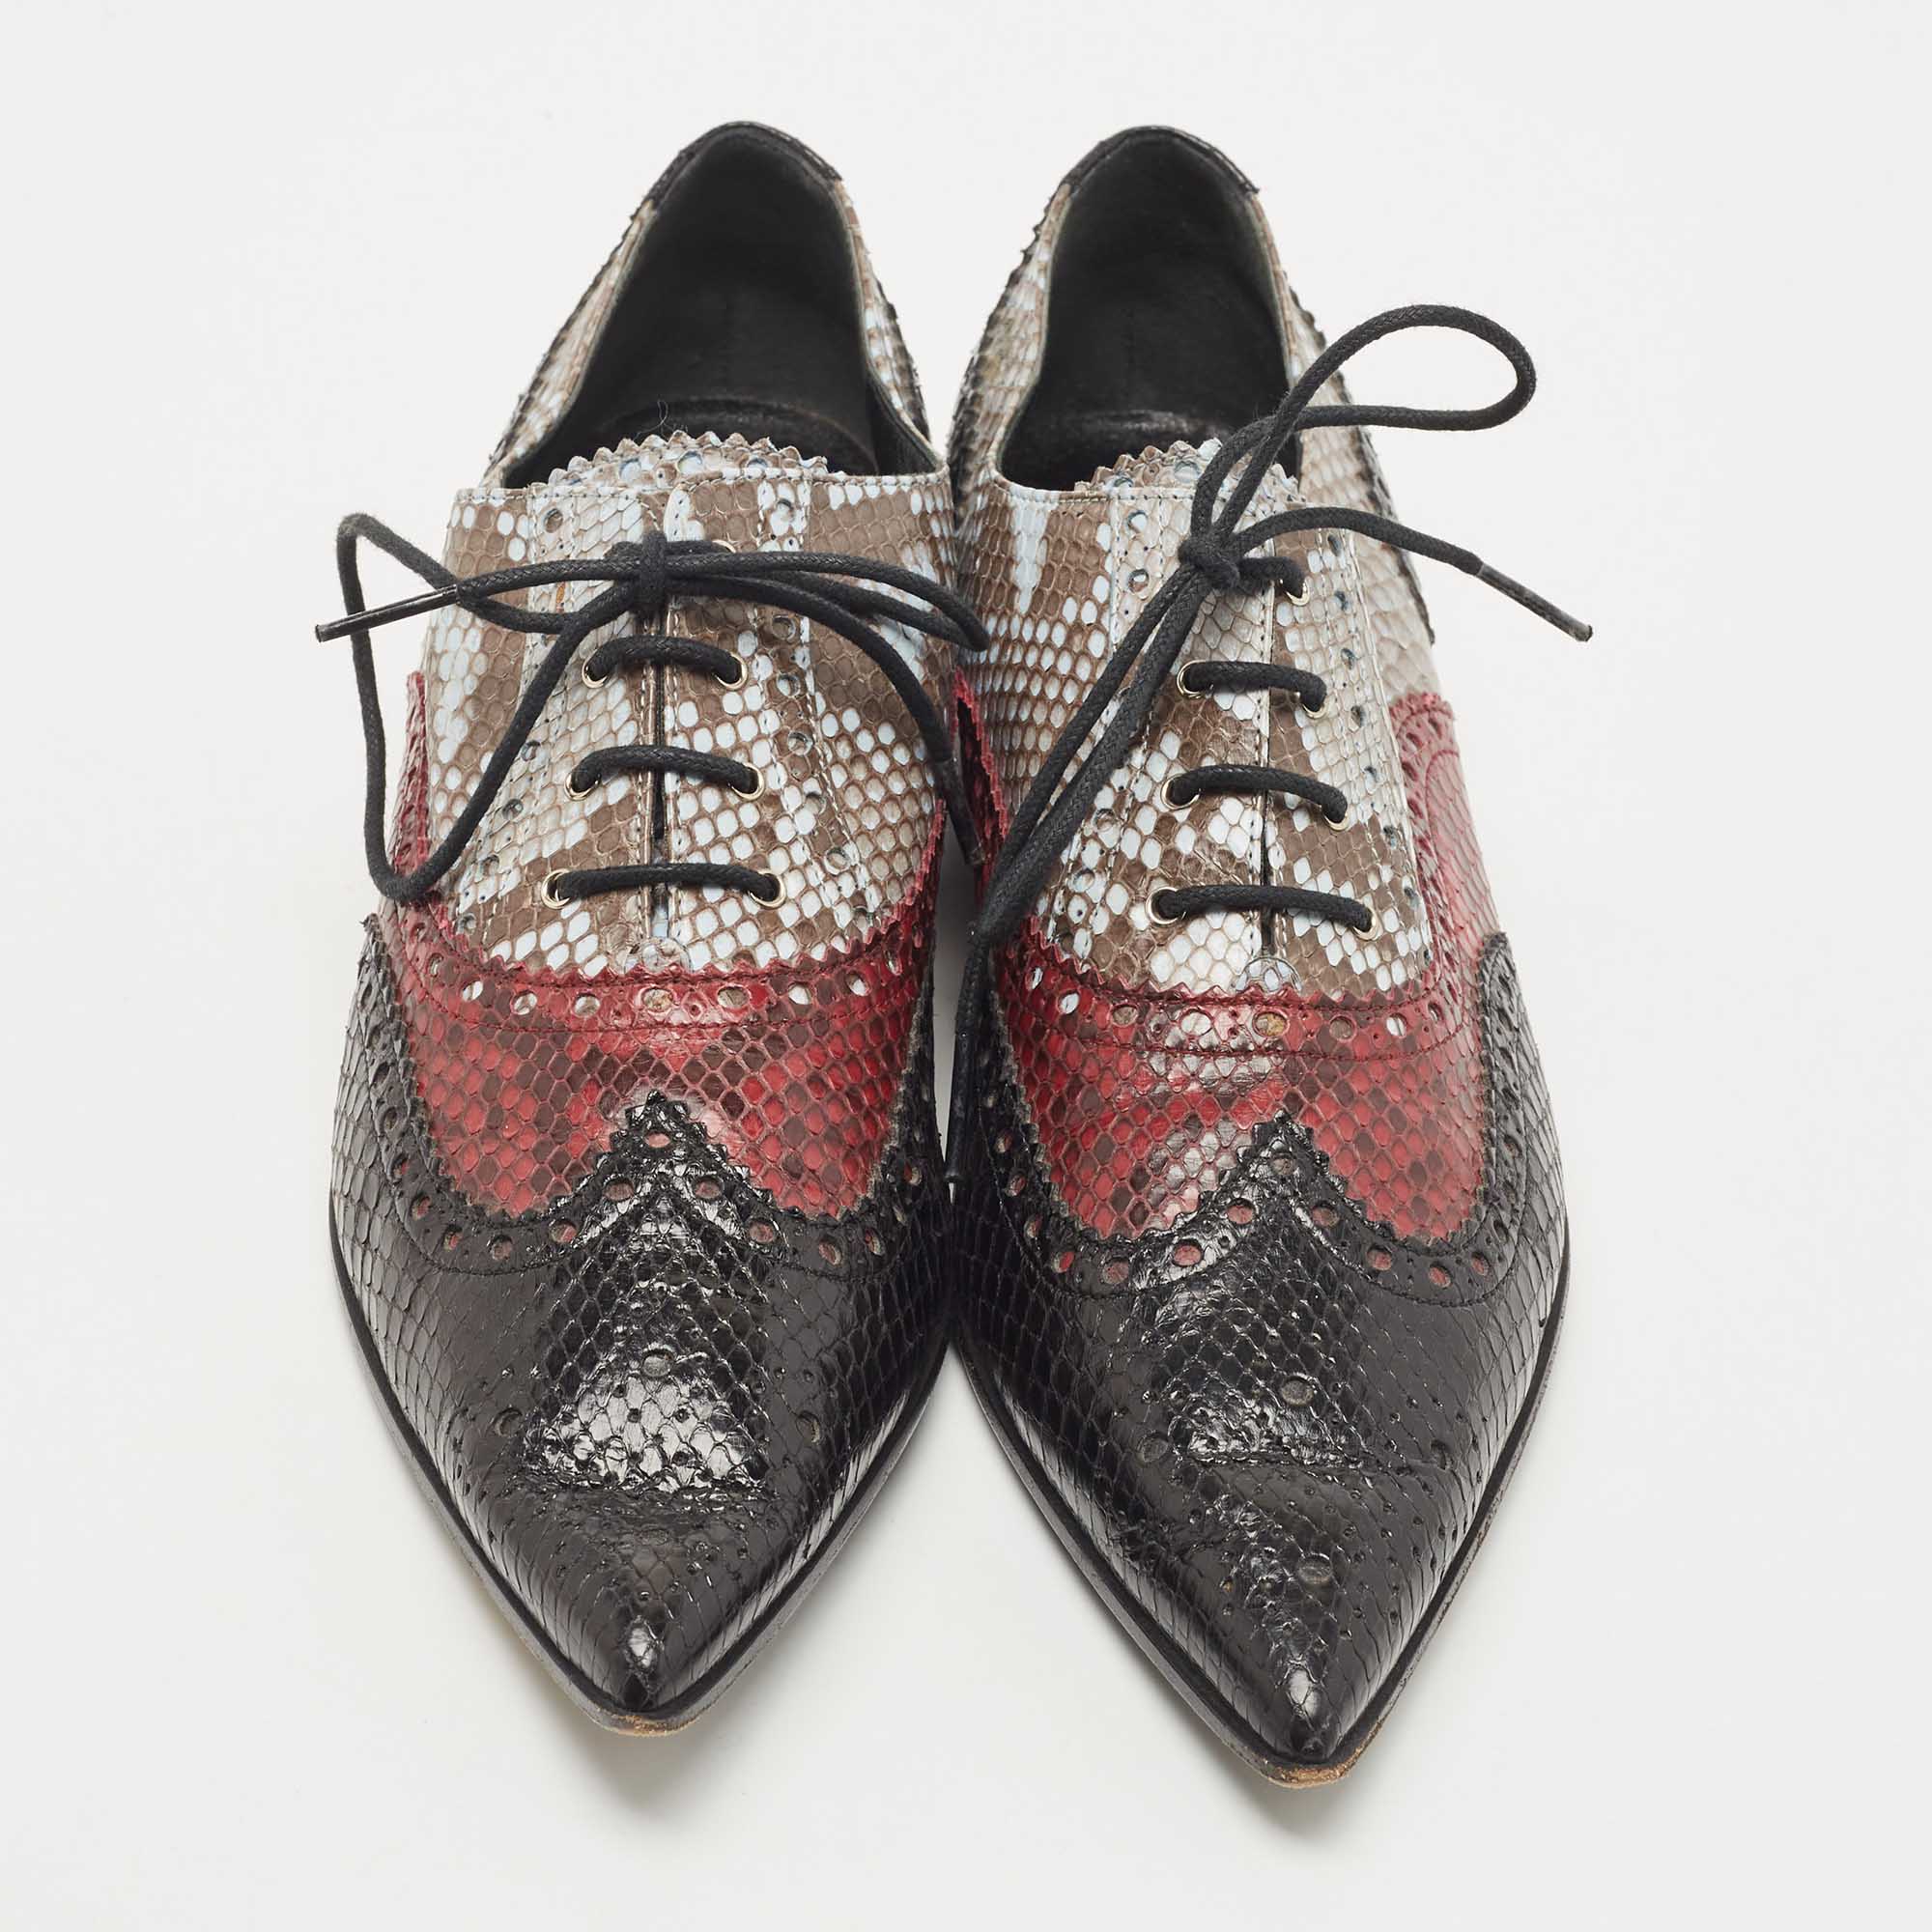 Gucci Multicolor Python Leather Brogue Pointed Toe Oxfords Size 39.5